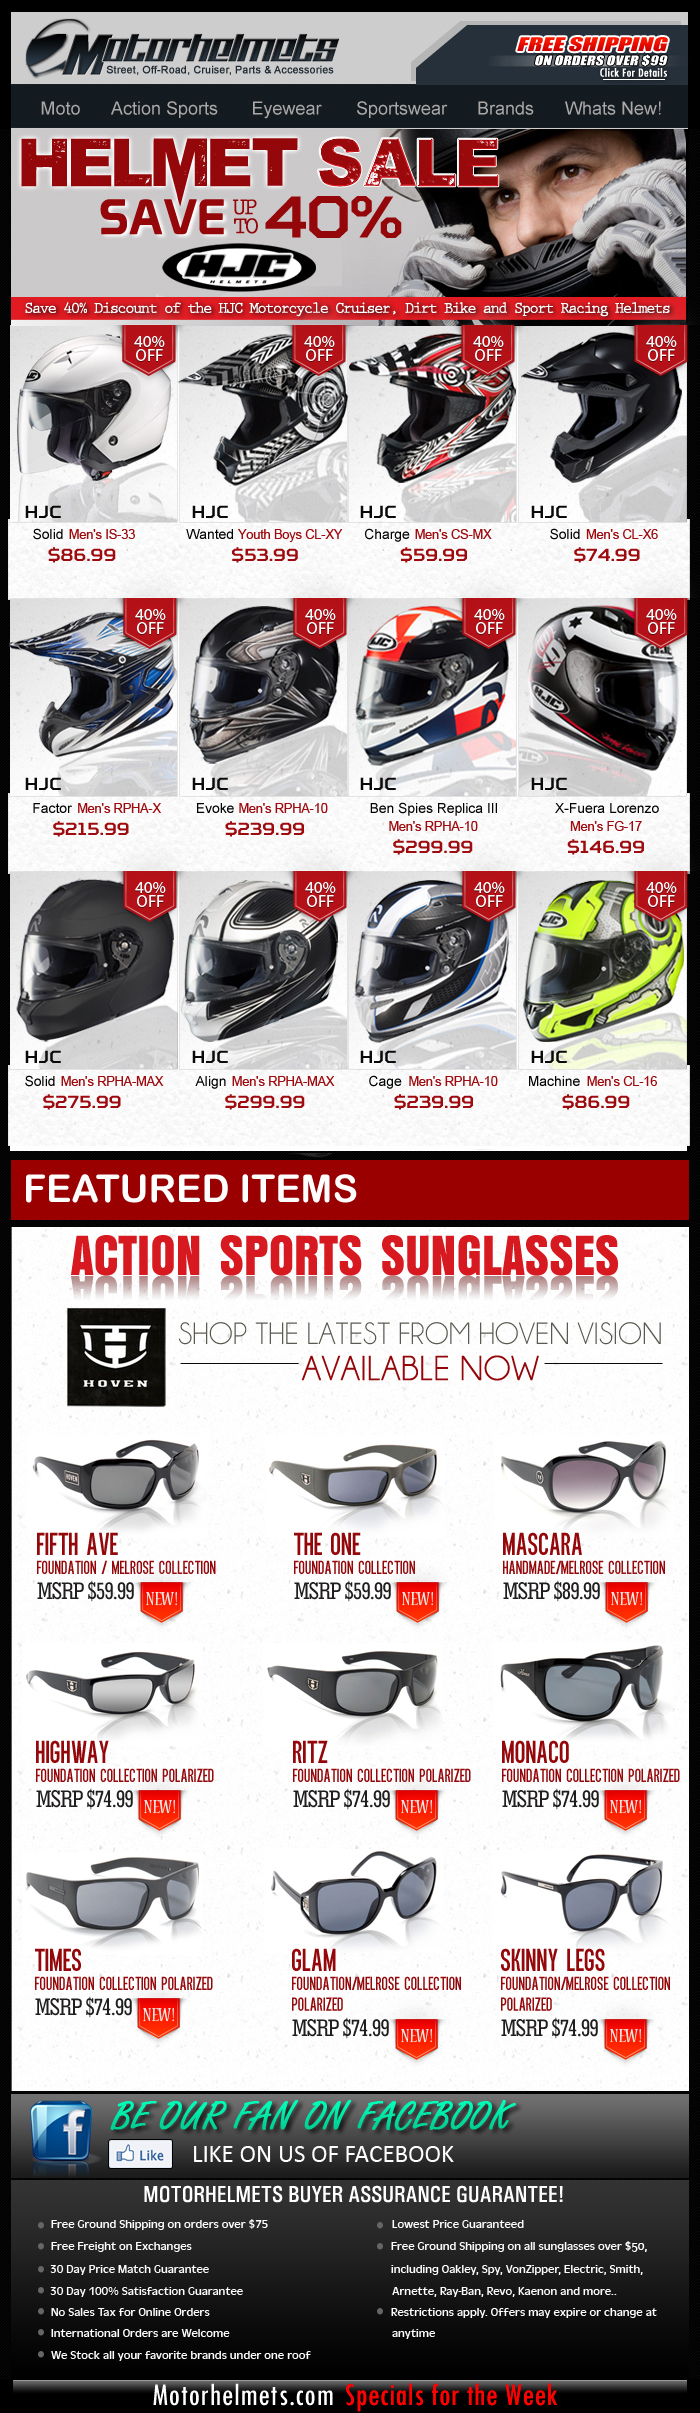 Save Up to 40% Off on HJC Helmets...Limited Stocks Only!